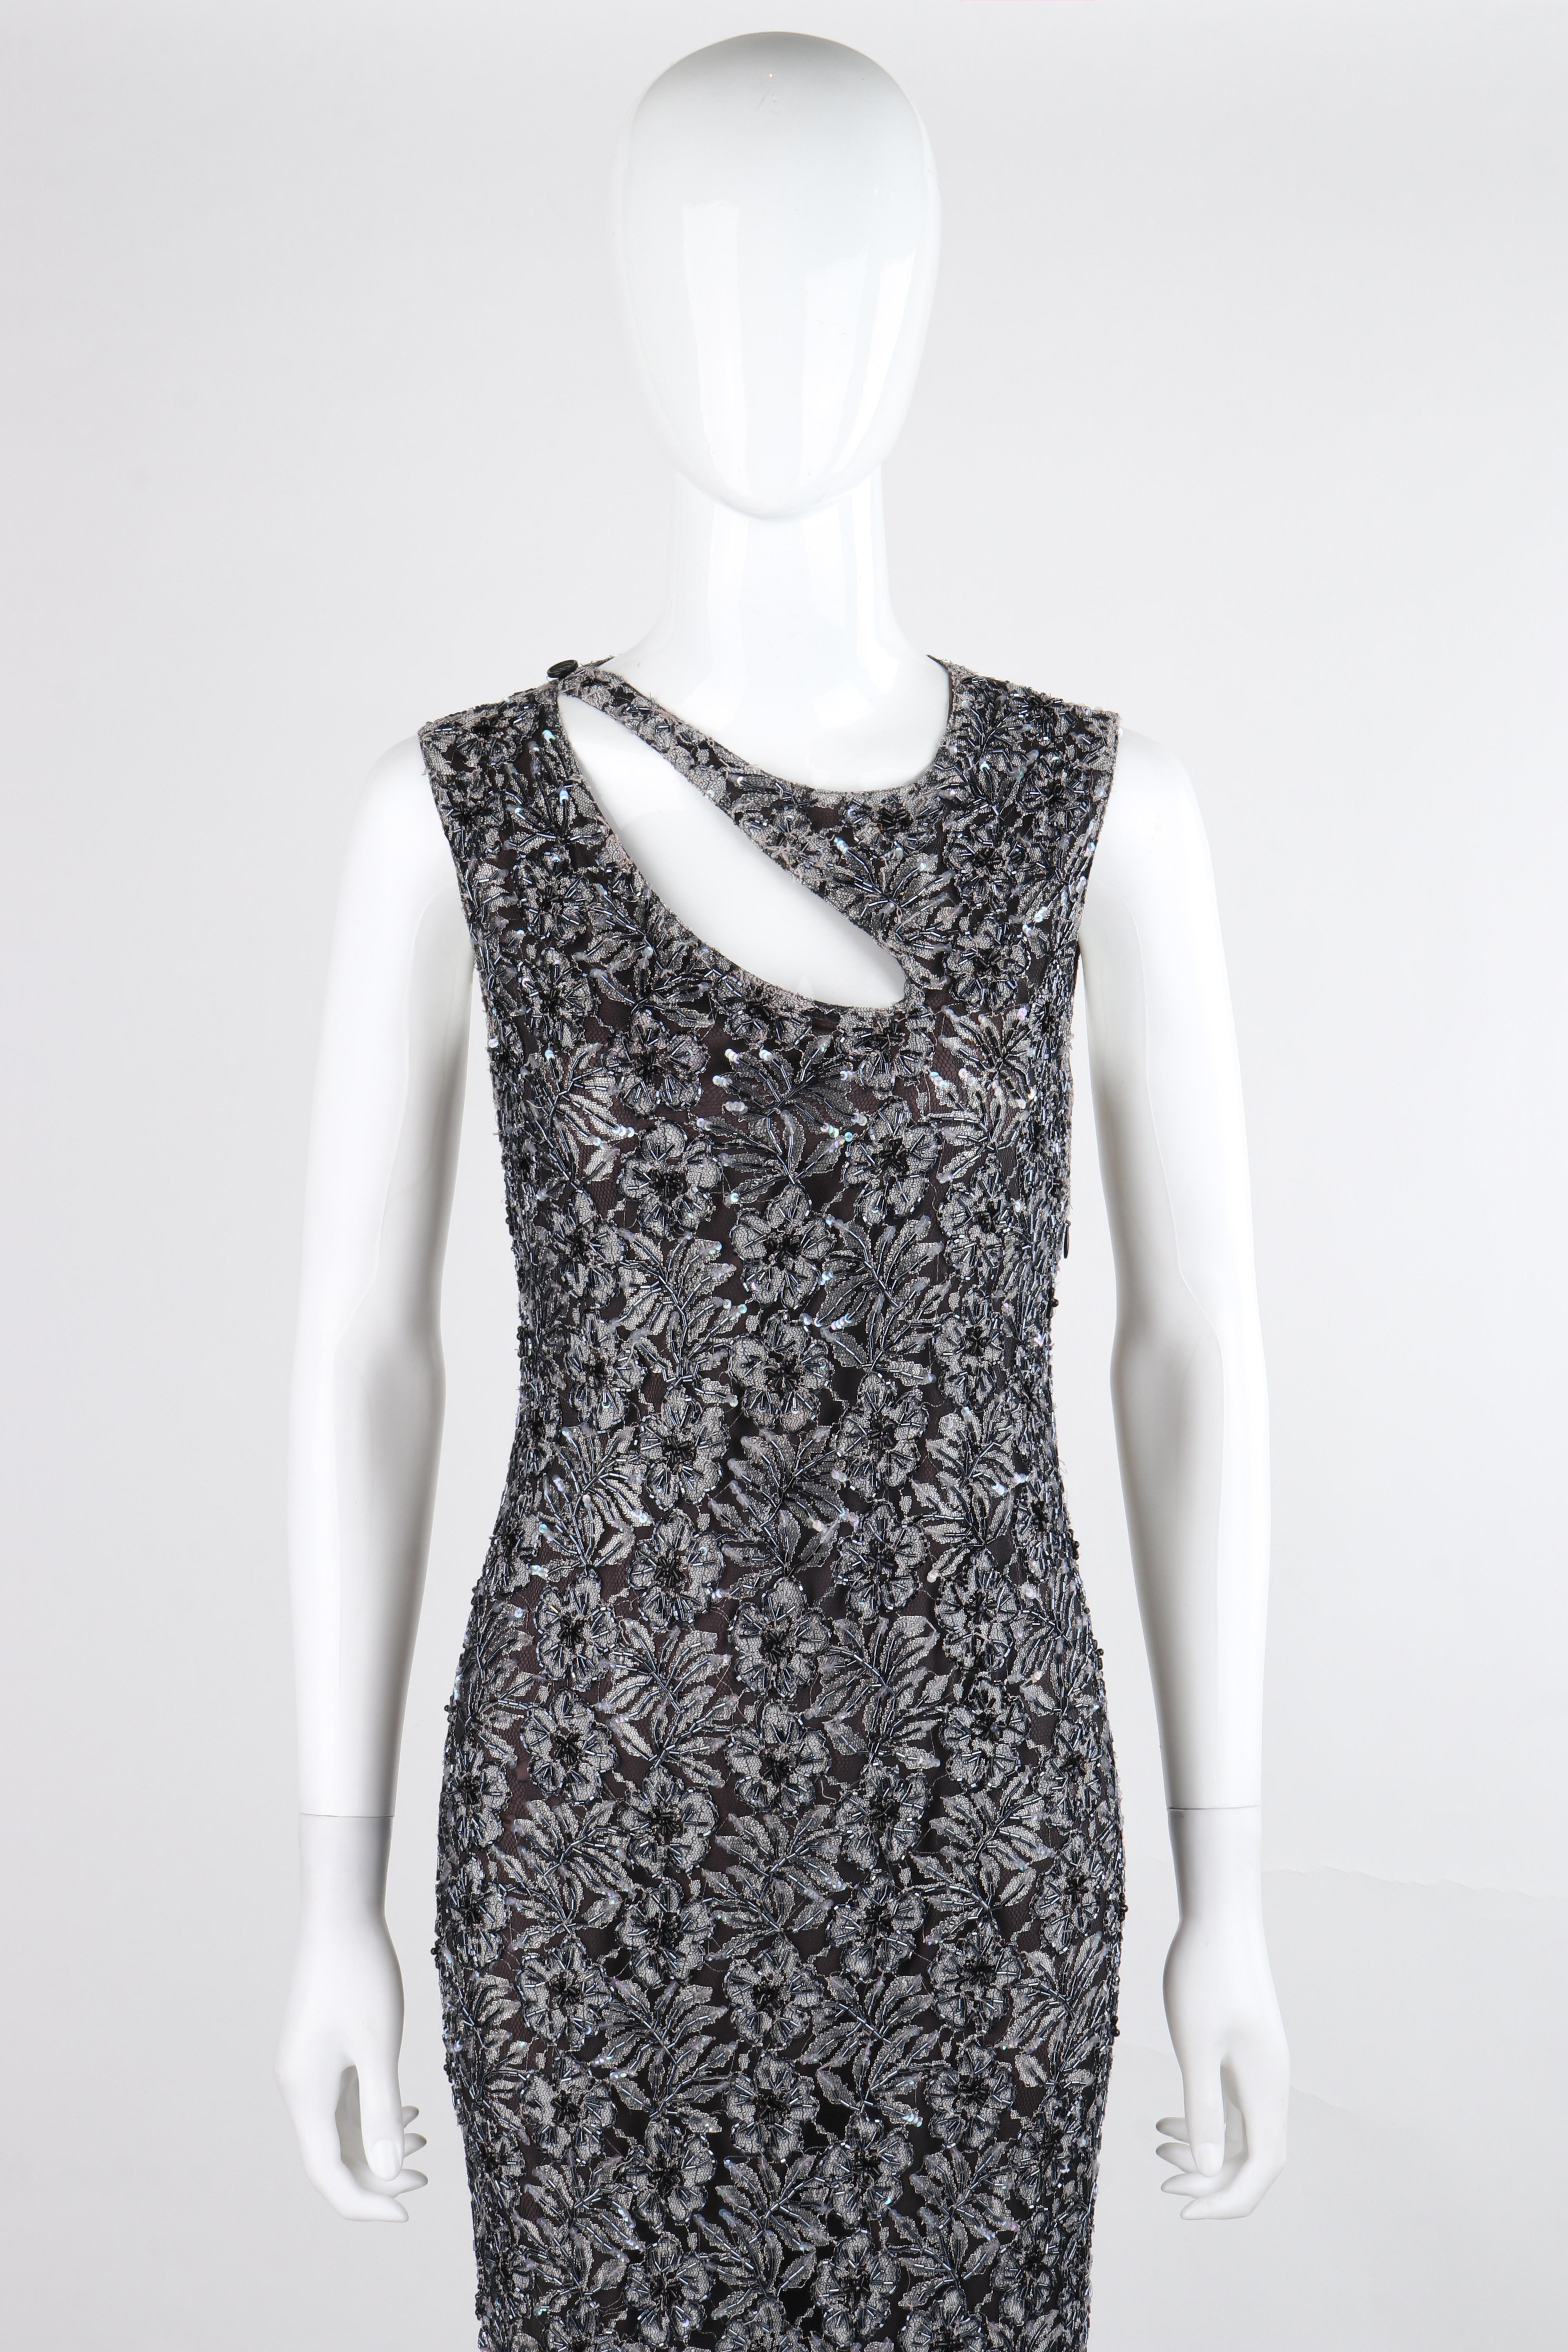 ALEXANDER McQUEEN c.1999 Vtg Grey Silver Sequin Beaded Lace Embellished Cutout Dress

Brand / Manufacturer: Alexander McQueen
Circa: 1999
Designer: Alexander McQueen
Style: Sleeveless dress
Color(s): Shades of grey and silver
Lined: Yes
Unmarked